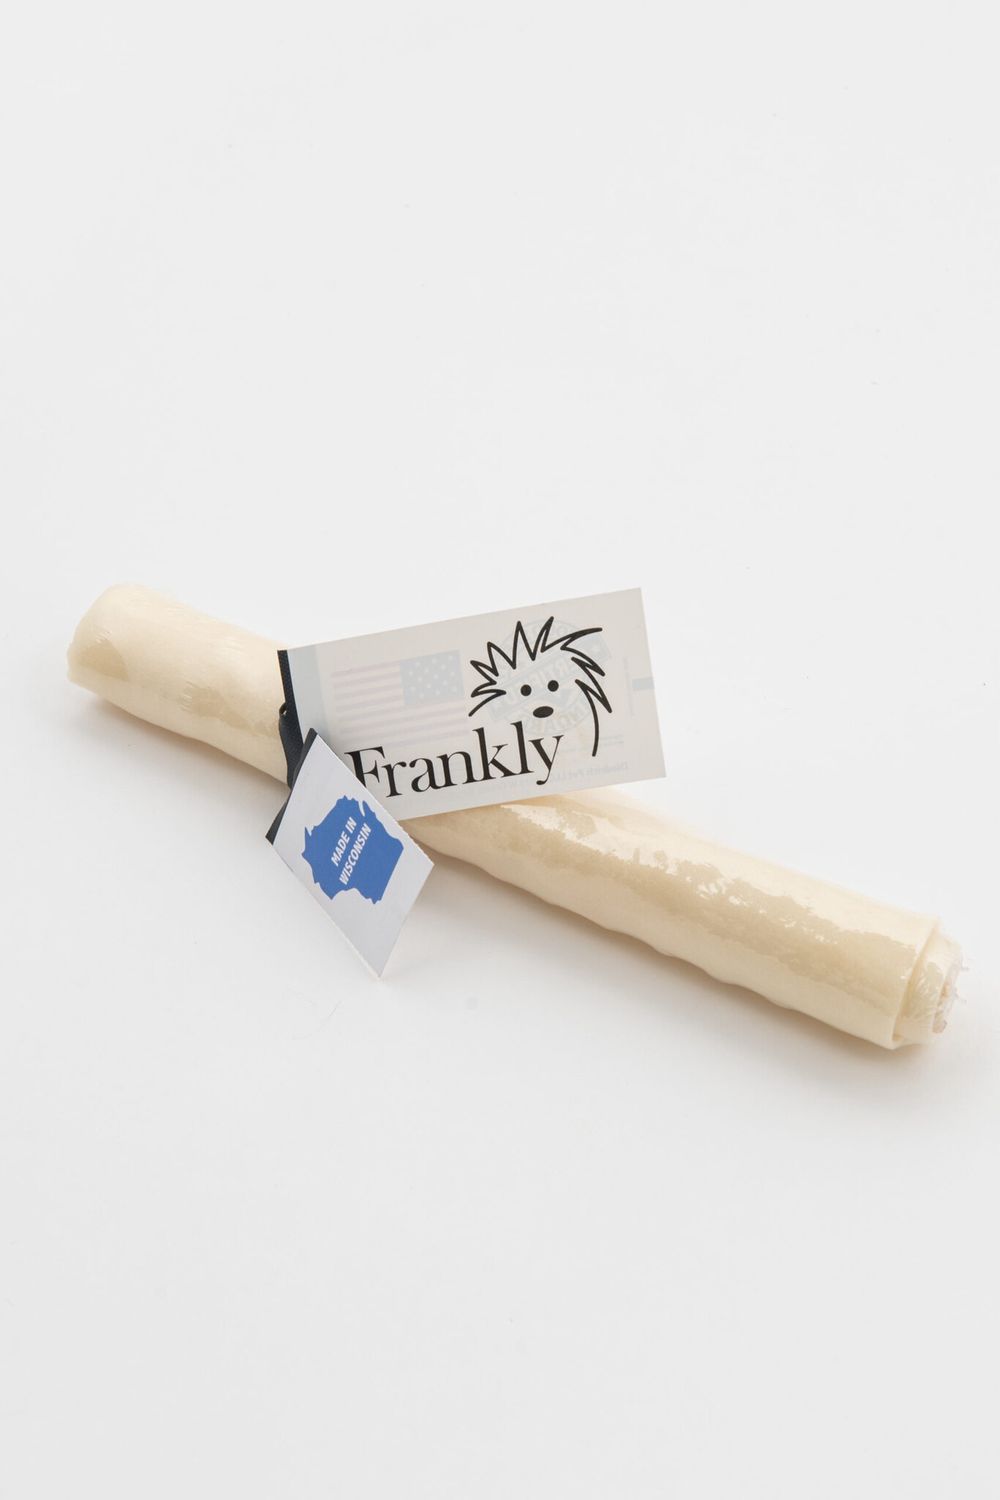 Frankly 10-11&quot; Beef Collagen Roll Dog Chew, Flavor: Natural, Size: XL